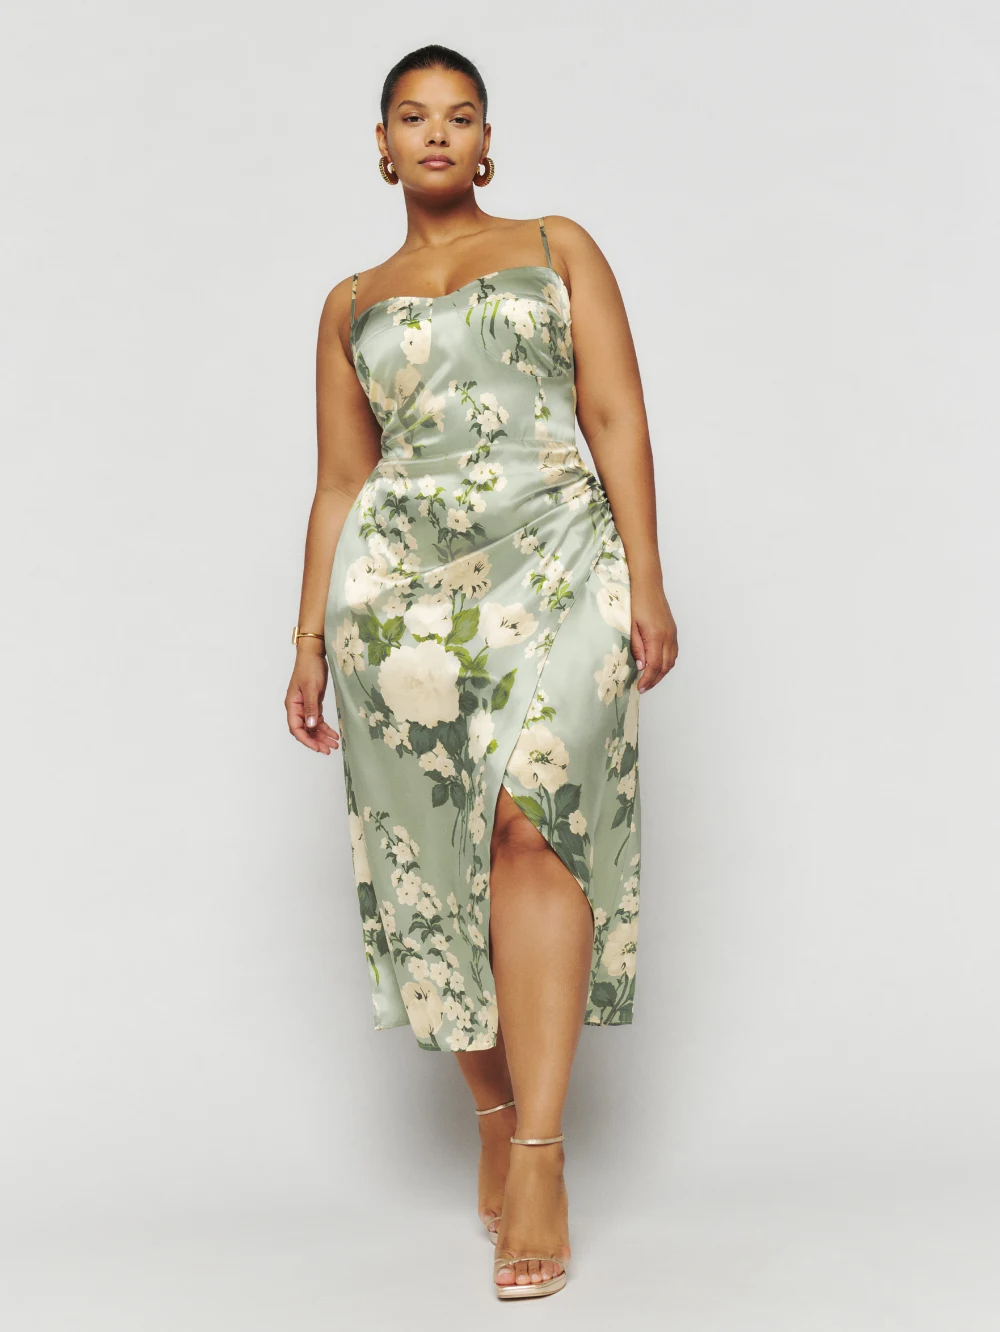 25 Plus-Size Cocktail Wedding Guest Dresses Guaranteed To Turn Heads